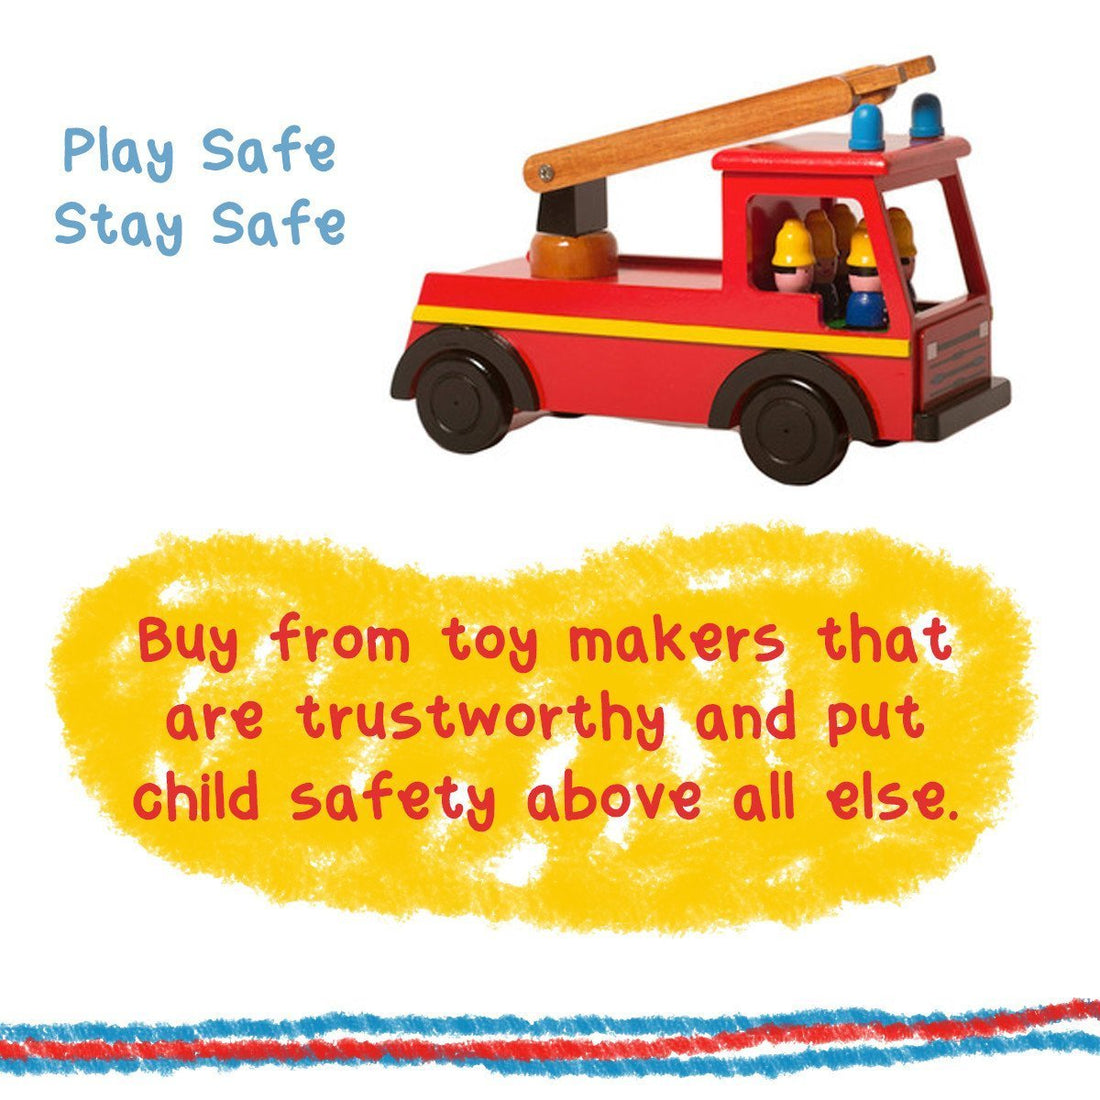 Play safe, stay safe - Shume Safe Toys For Babies